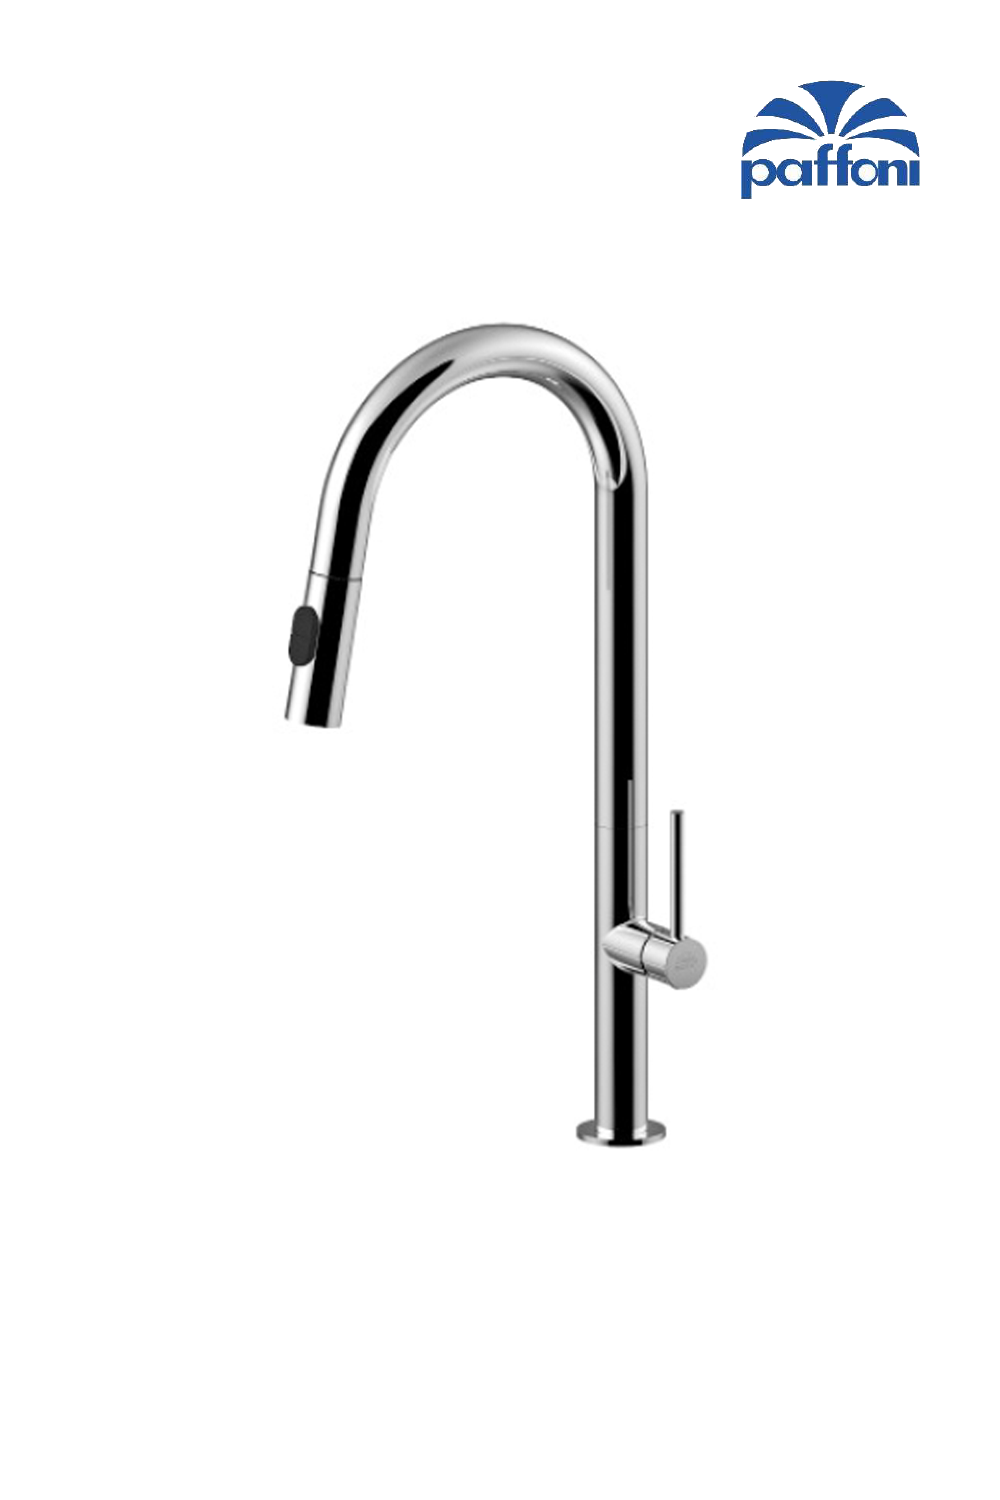 Paffoni CH185 CHEF tall one-hole sink mixer with pull-out spray | Made in Italy |